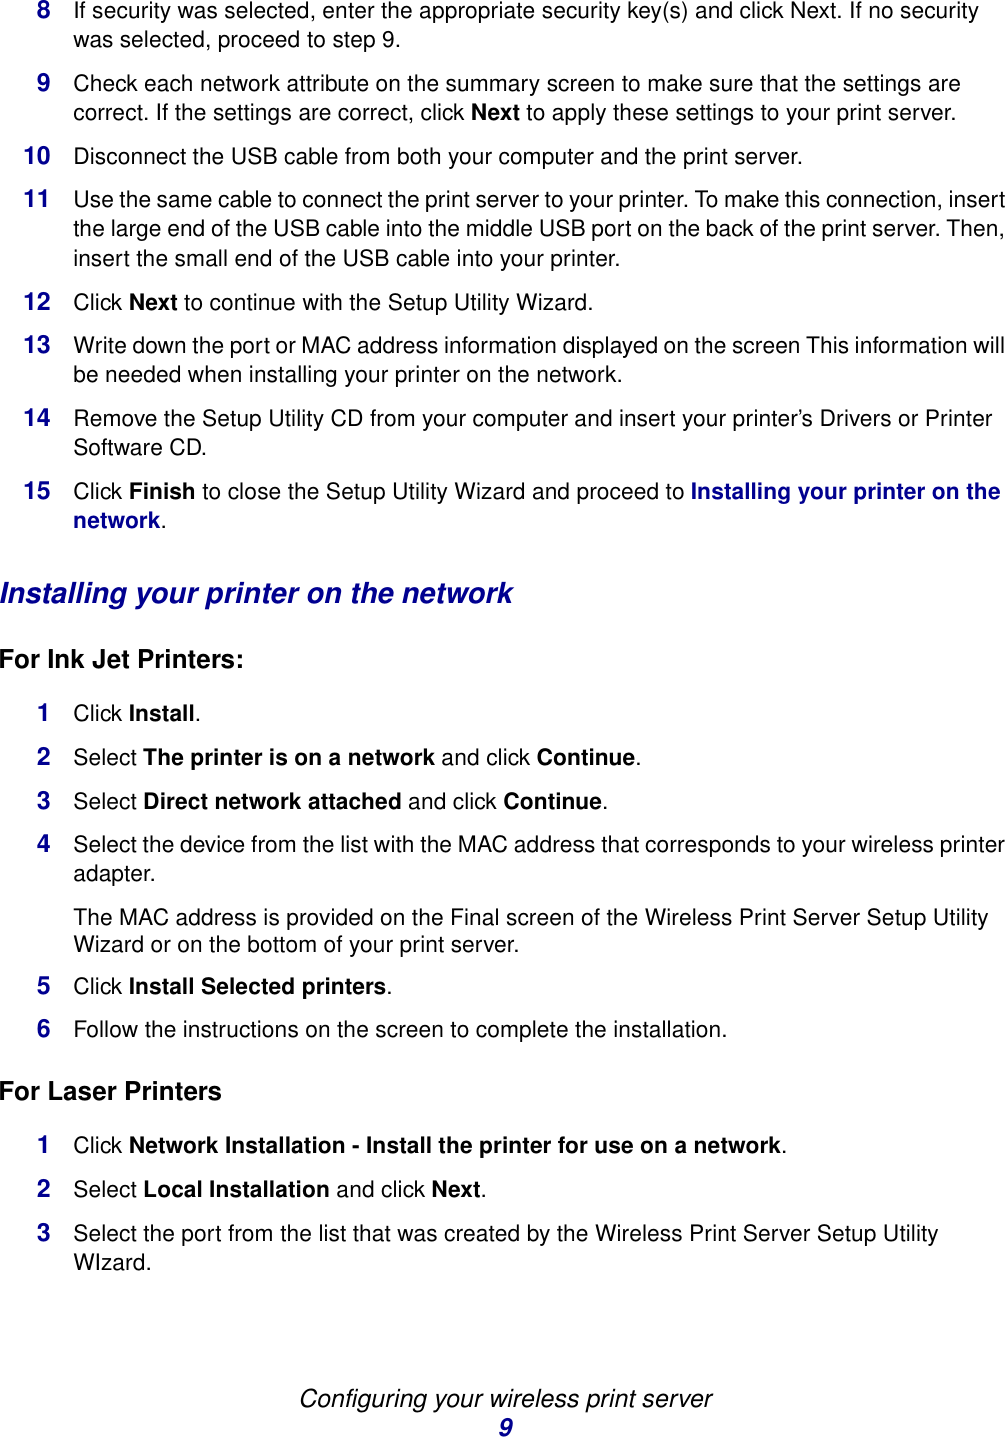 Configuring your wireless print server98If security was selected, enter the appropriate security key(s) and click Next. If no security was selected, proceed to step 9. 9Check each network attribute on the summary screen to make sure that the settings are correct. If the settings are correct, click Next to apply these settings to your print server. 10 Disconnect the USB cable from both your computer and the print server. 11 Use the same cable to connect the print server to your printer. To make this connection, insert the large end of the USB cable into the middle USB port on the back of the print server. Then, insert the small end of the USB cable into your printer. 12 Click Next to continue with the Setup Utility Wizard. 13 Write down the port or MAC address information displayed on the screen This information will be needed when installing your printer on the network.14 Remove the Setup Utility CD from your computer and insert your printer’s Drivers or Printer Software CD. 15 Click Finish to close the Setup Utility Wizard and proceed to Installing your printer on the network.Installing your printer on the networkFor Ink Jet Printers:1Click Install.2Select The printer is on a network and click Continue. 3Select Direct network attached and click Continue.4Select the device from the list with the MAC address that corresponds to your wireless printer adapter. The MAC address is provided on the Final screen of the Wireless Print Server Setup Utility Wizard or on the bottom of your print server. 5Click Install Selected printers. 6Follow the instructions on the screen to complete the installation. For Laser Printers1Click Network Installation - Install the printer for use on a network. 2Select Local Installation and click Next.3Select the port from the list that was created by the Wireless Print Server Setup Utility WIzard. 